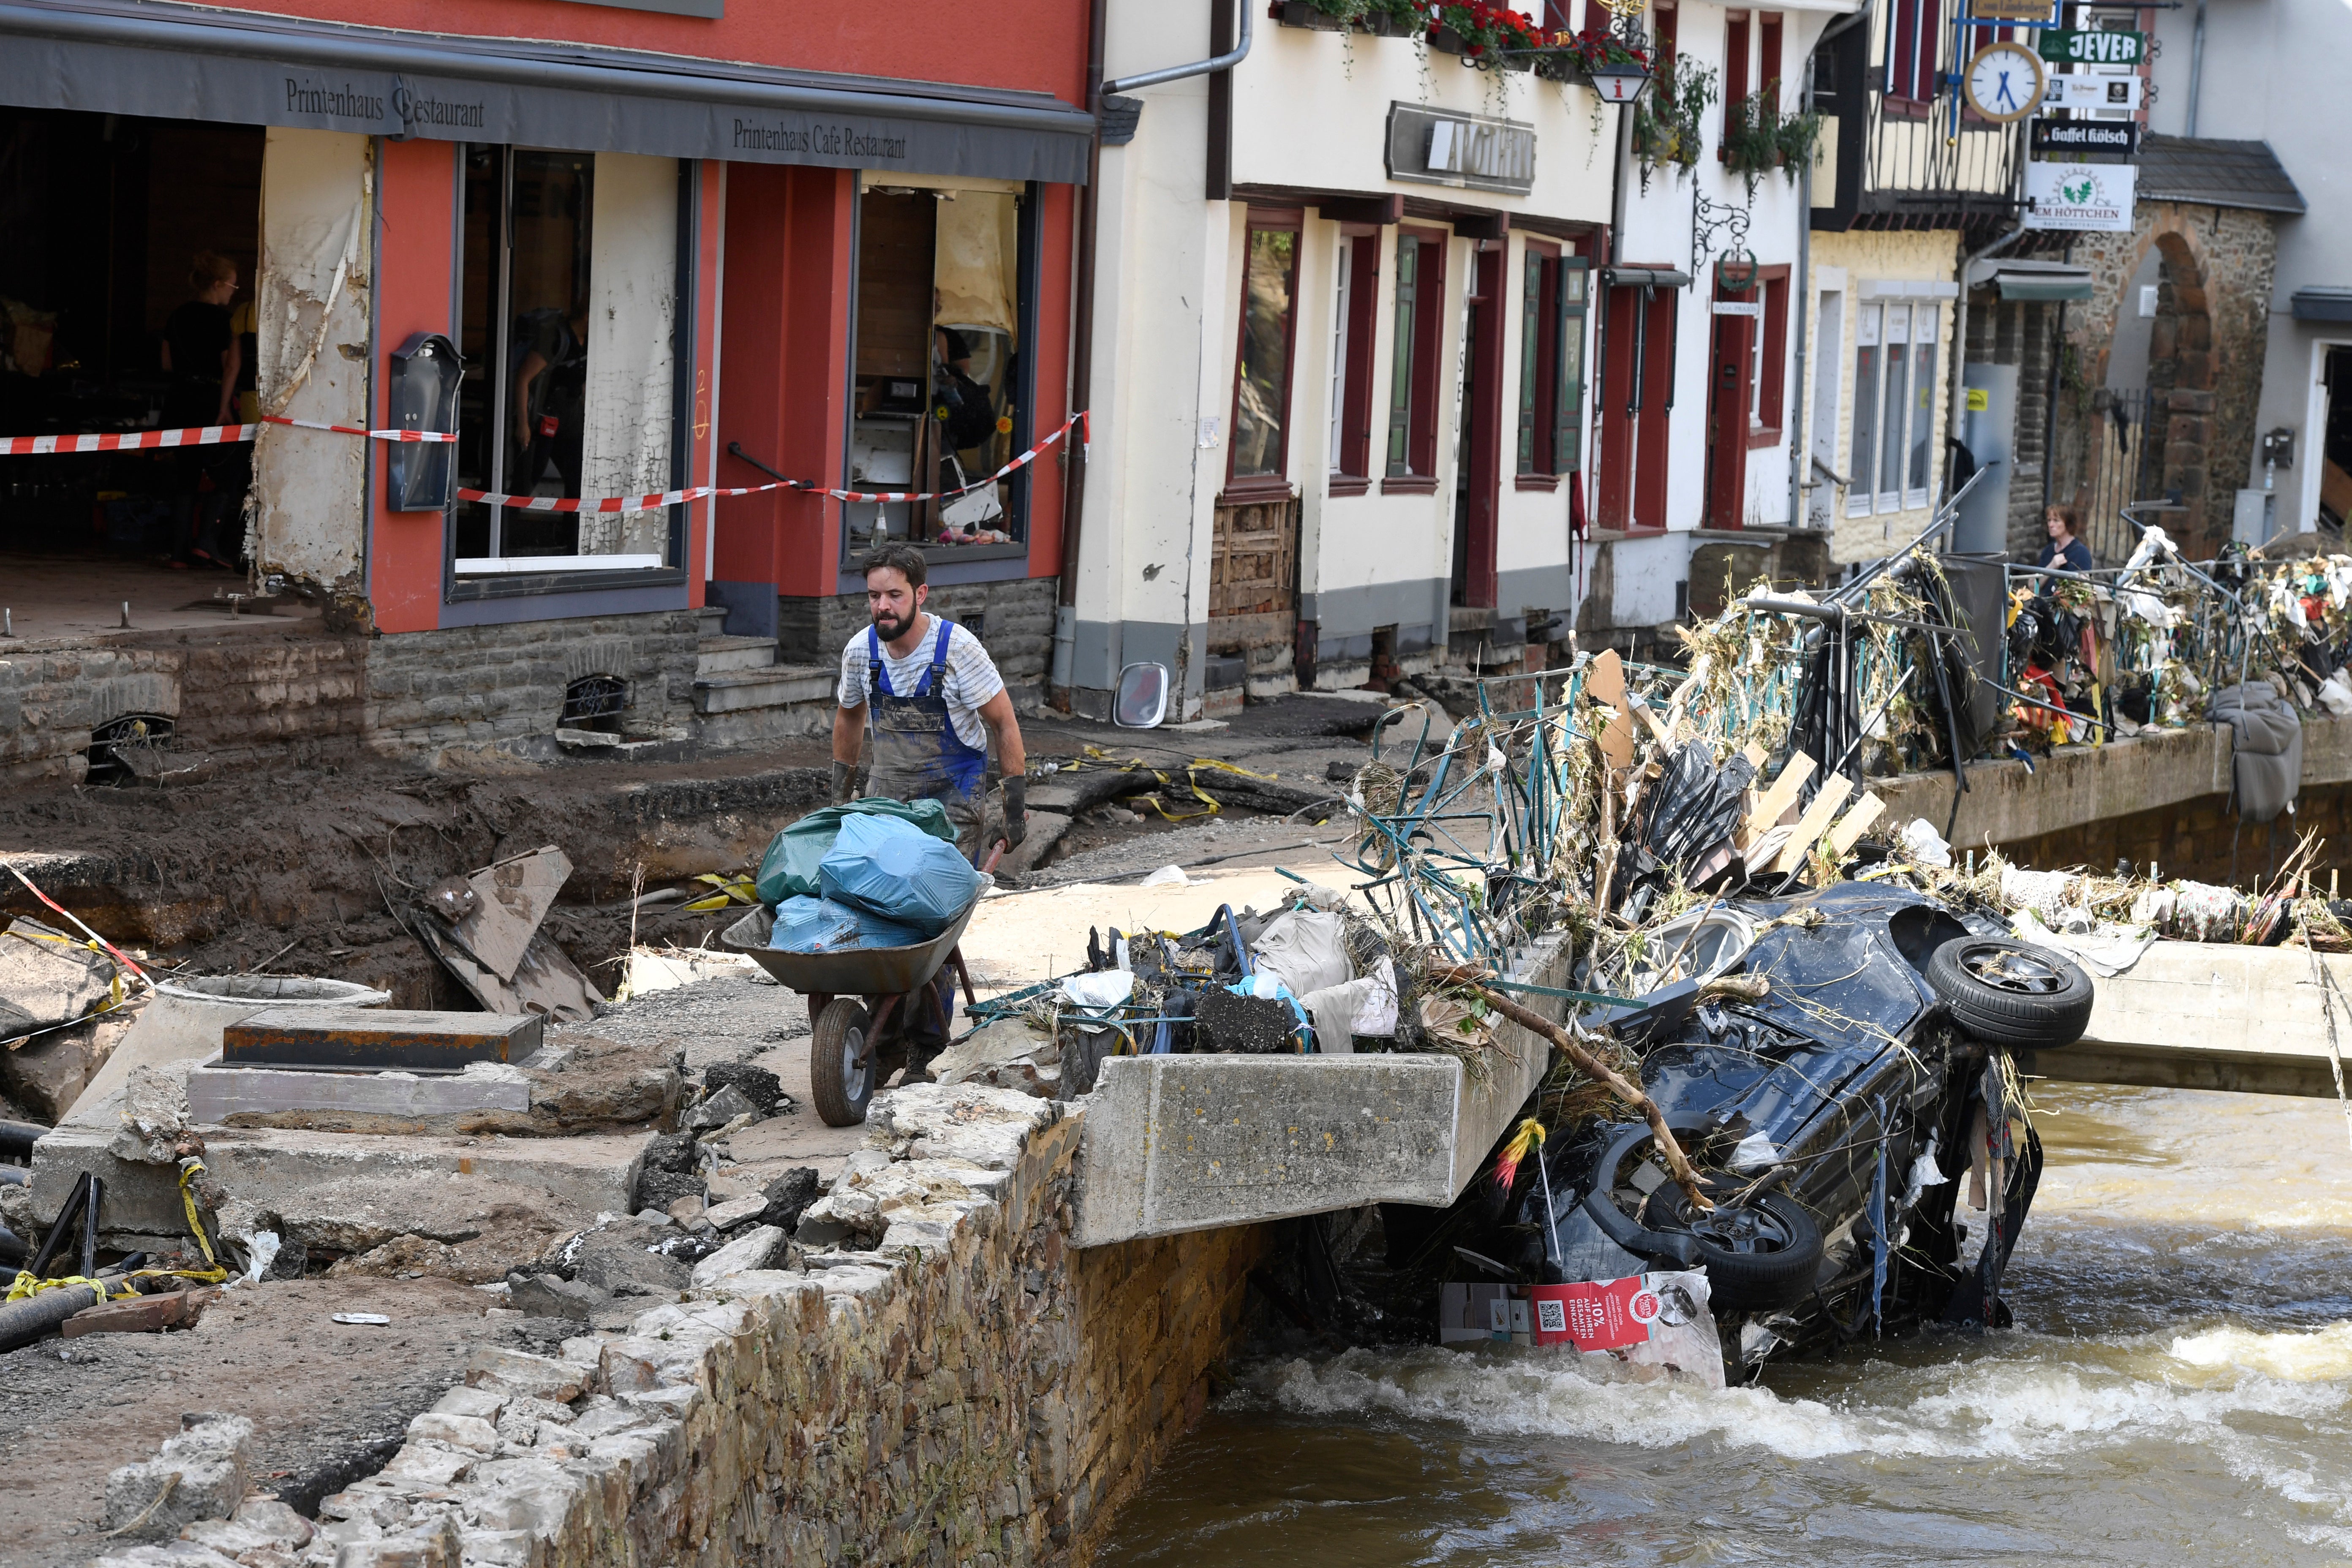 At least 180 have died in unprecedented floods in Germany, Belgium and other parts of western Europe